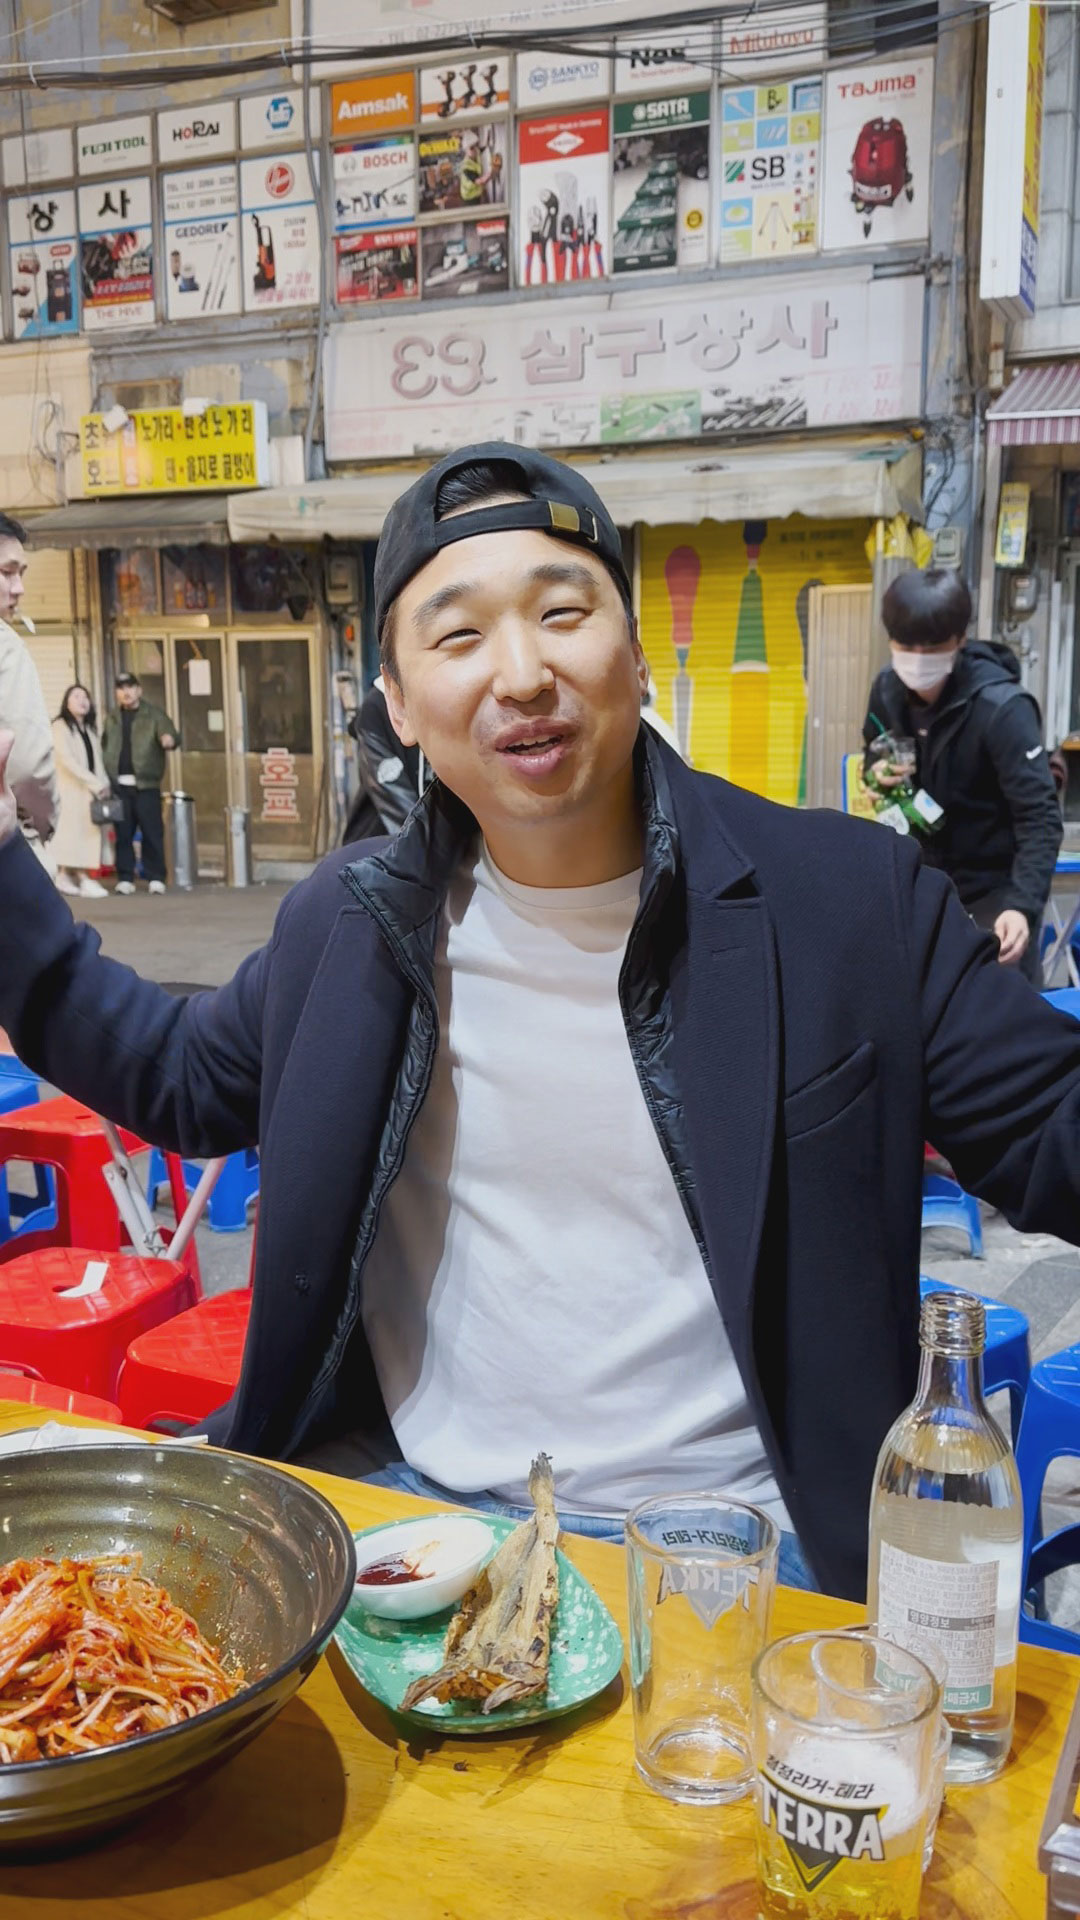 Must Eat Places in Seoul, Korea as recommended by Chef Chris Cho